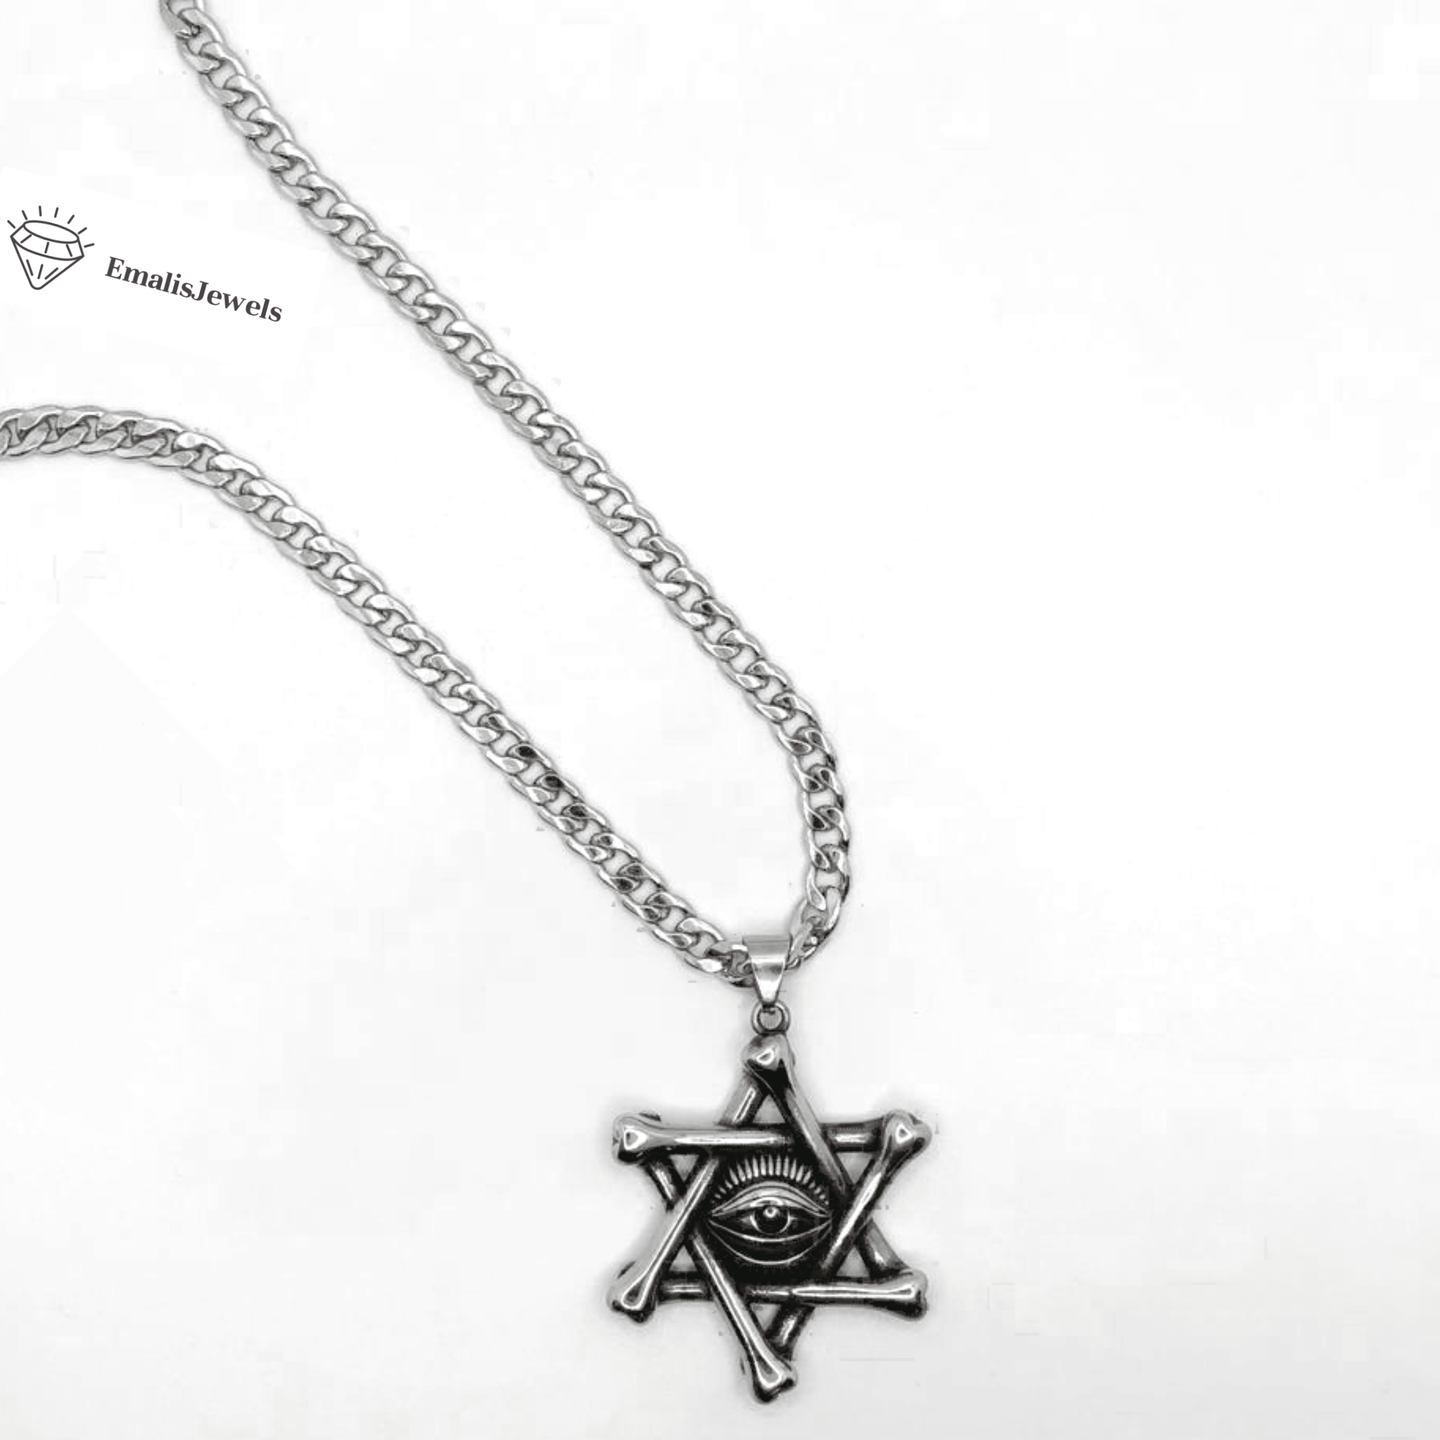 Stainless Steel Chain Necklace and Stainless Steel Star of David w Eye Pendant - PremiumBrandGoods